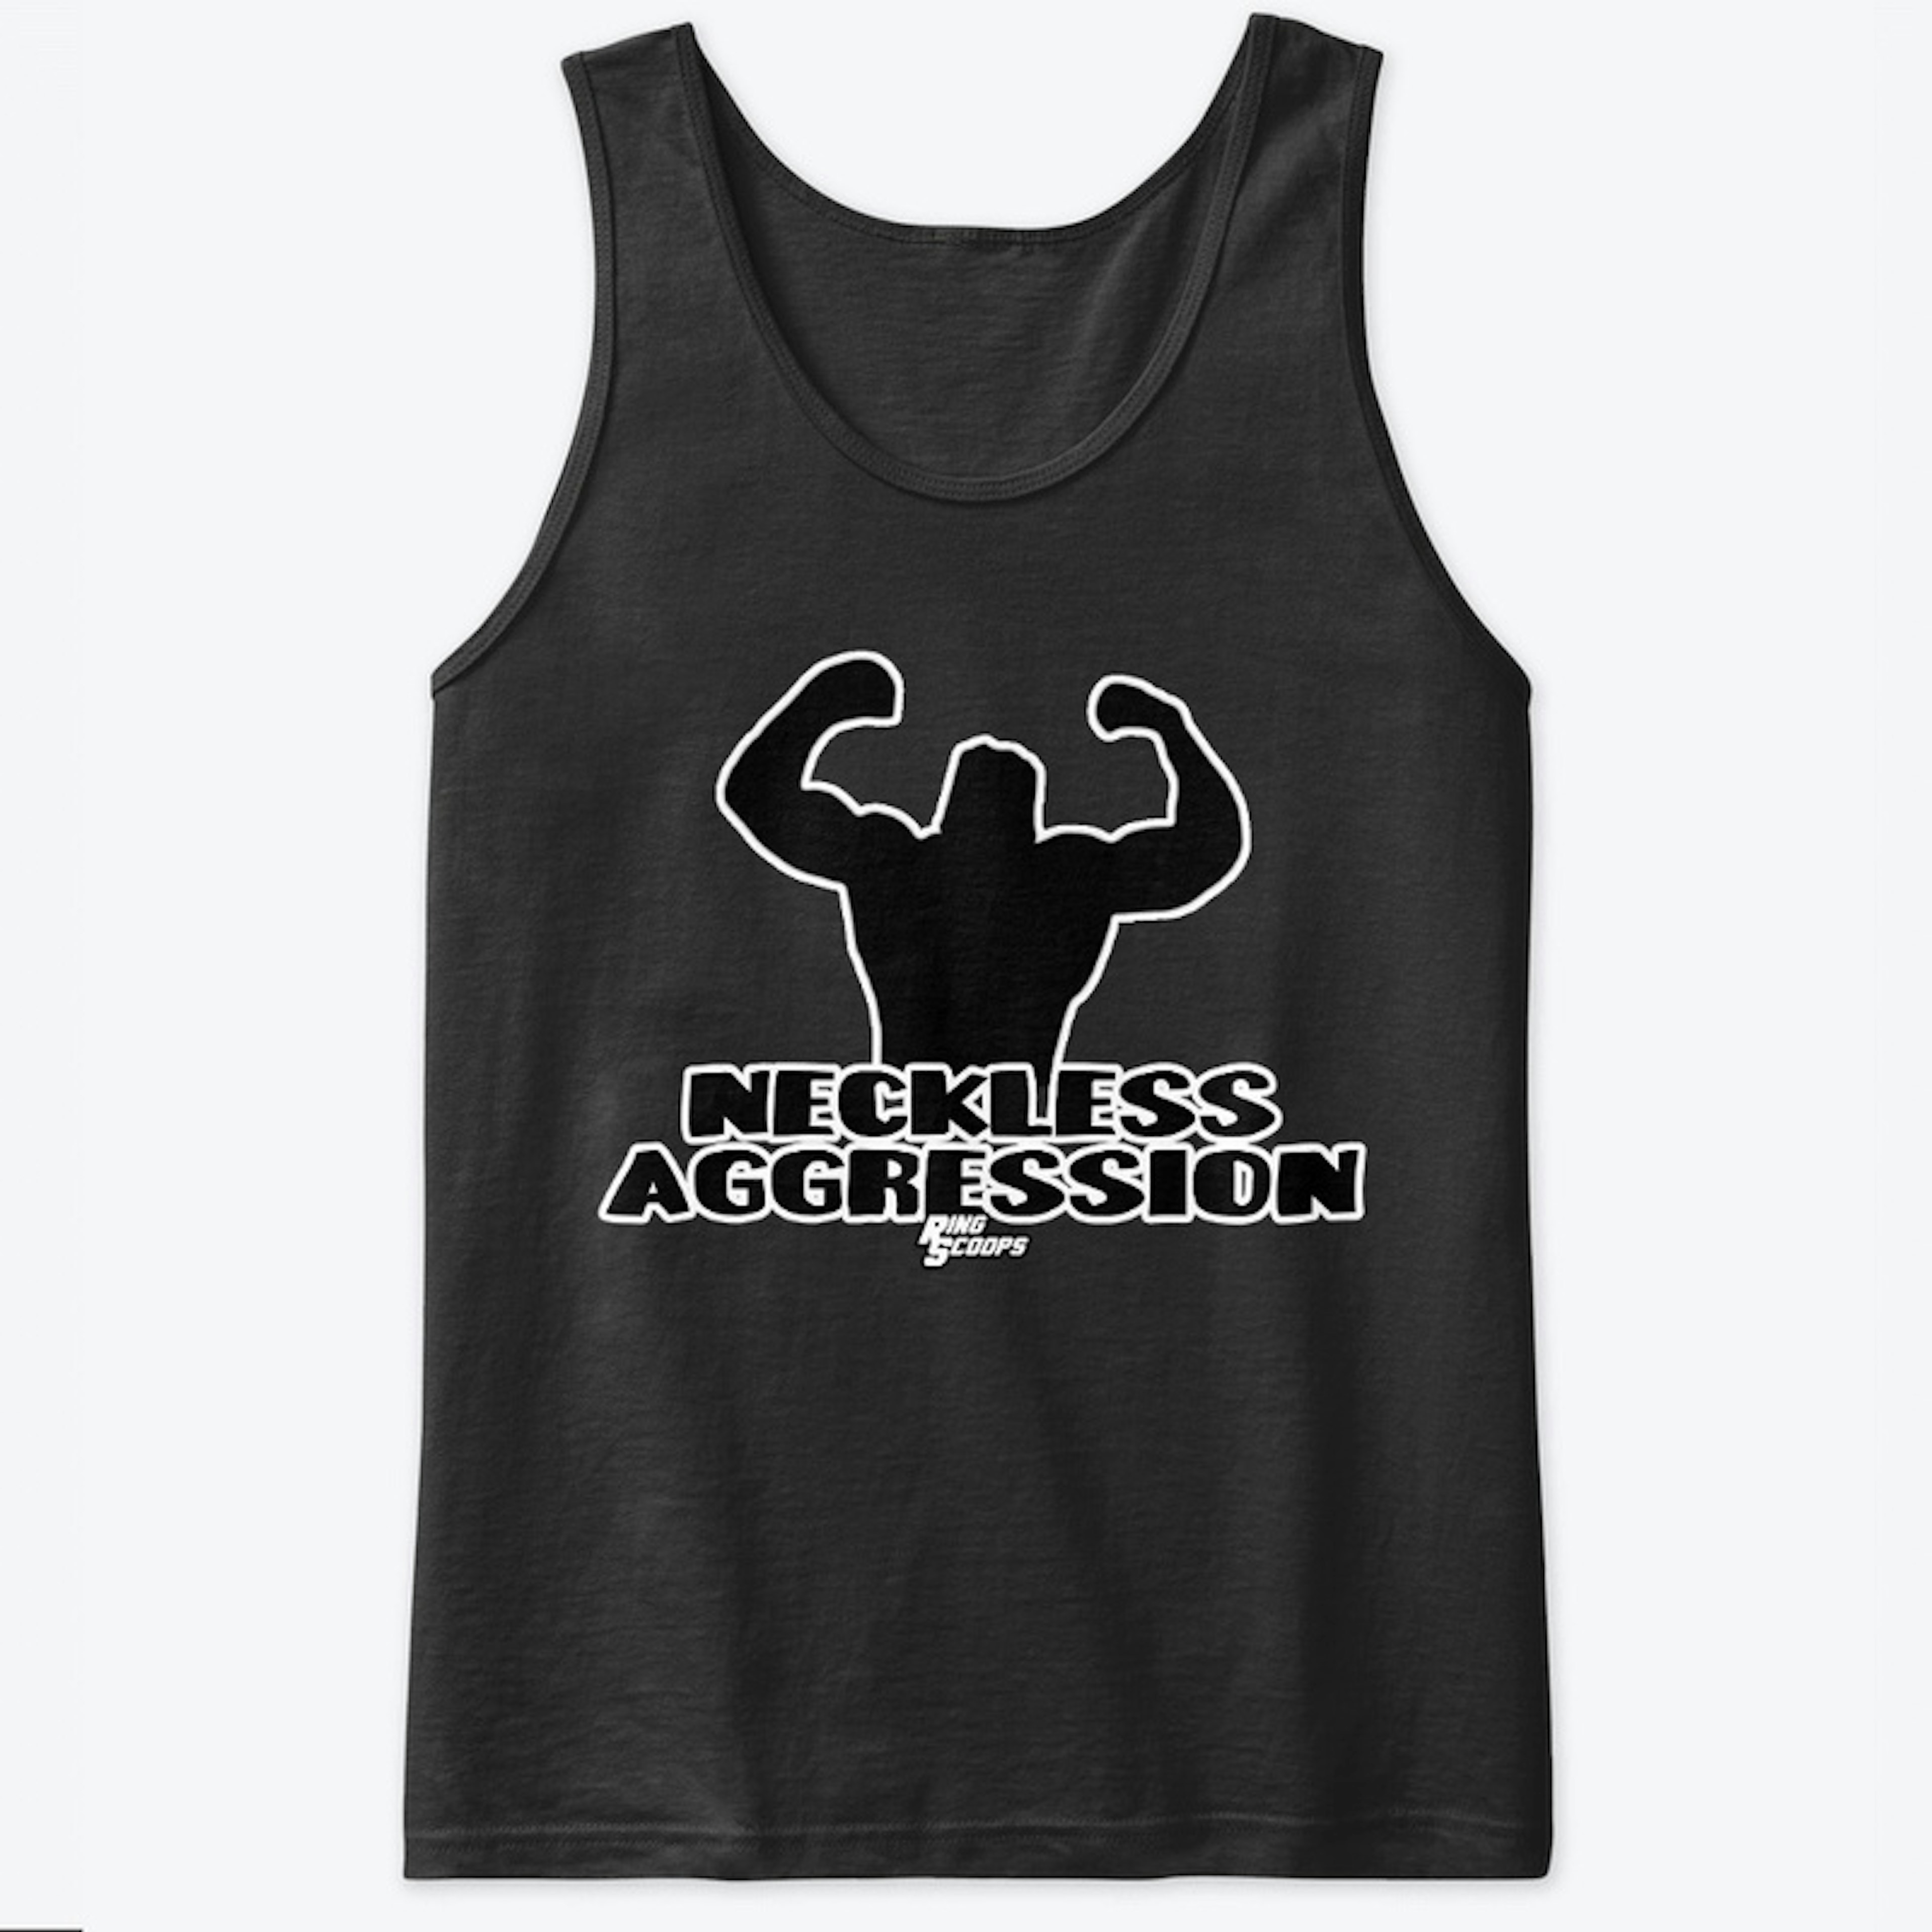 Neckless Aggression